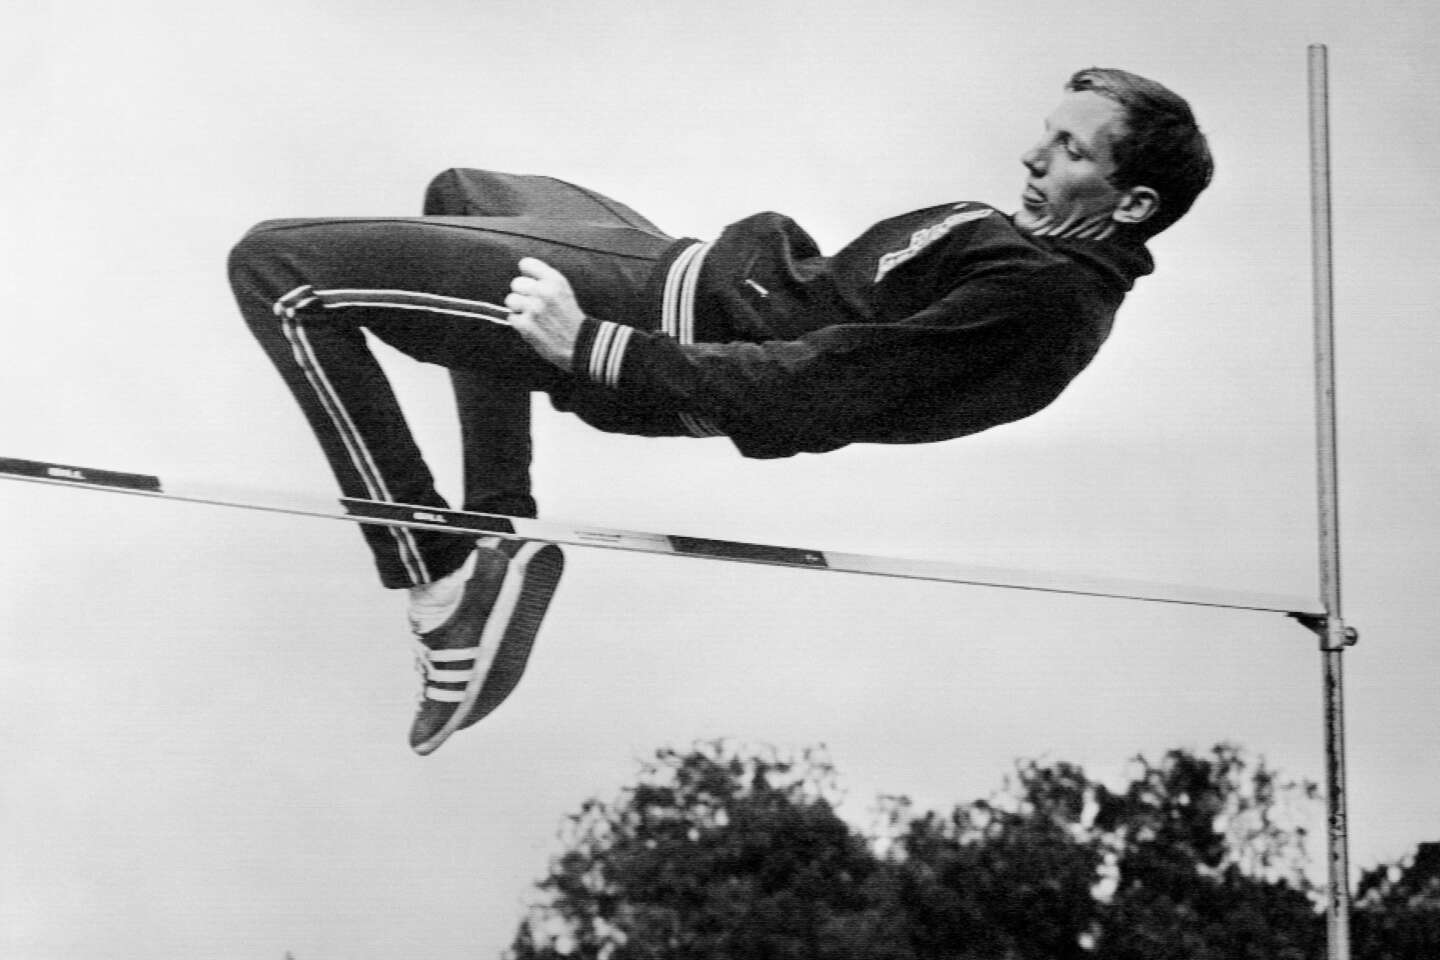 Dick Fosbury, the American athlete who gave his name to the high jump technique, is dead